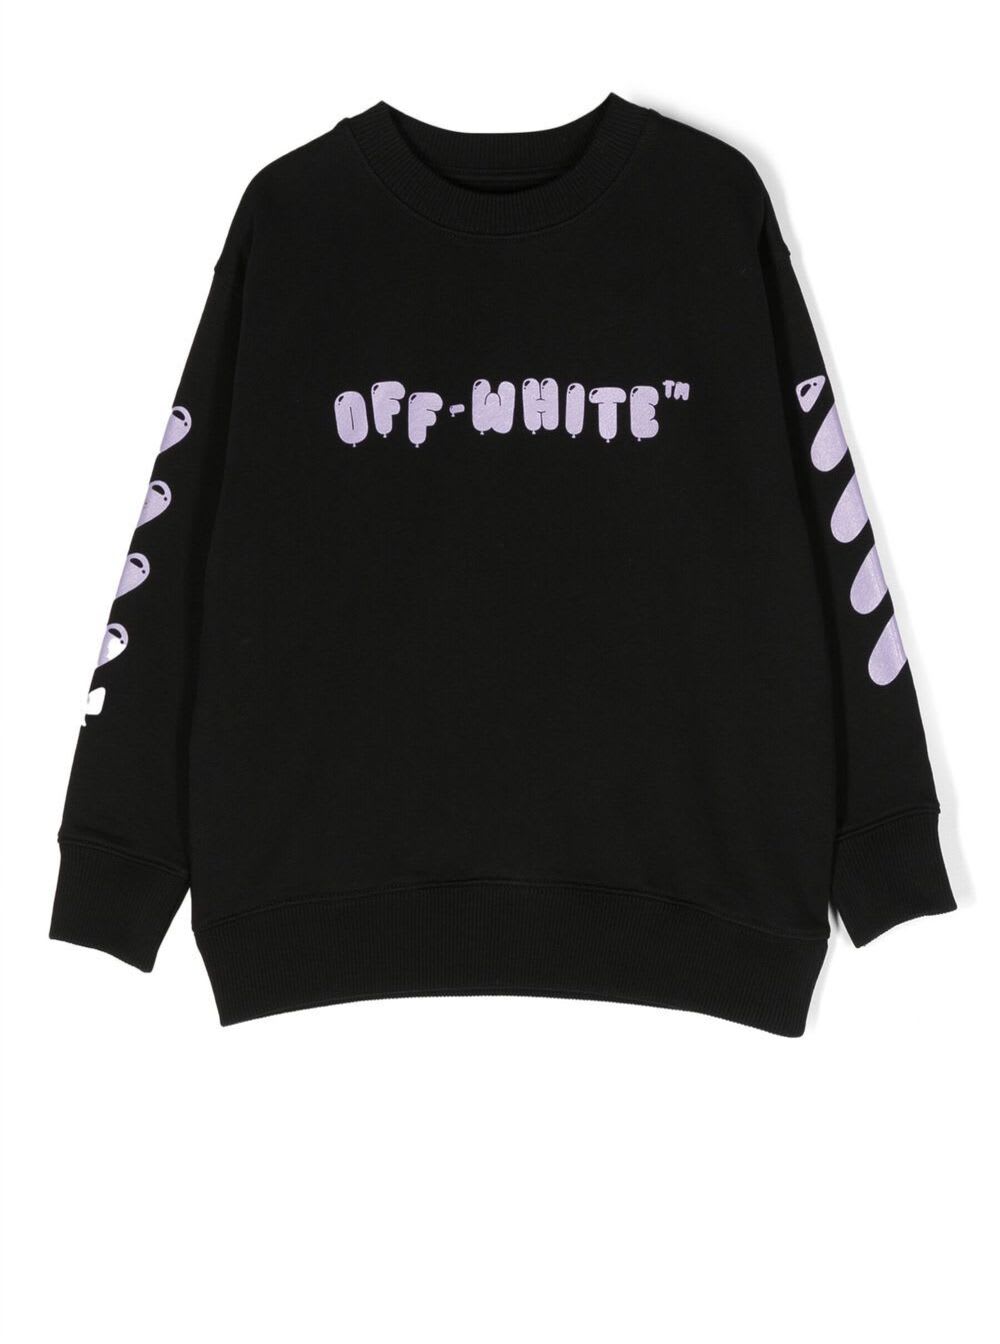 OFF-WHITE SWEATSHIRT WITH PRINTED LOGO AND SIGNATURE DIAG-STRIPE MOTIF IN BLACK COTTON GIRL